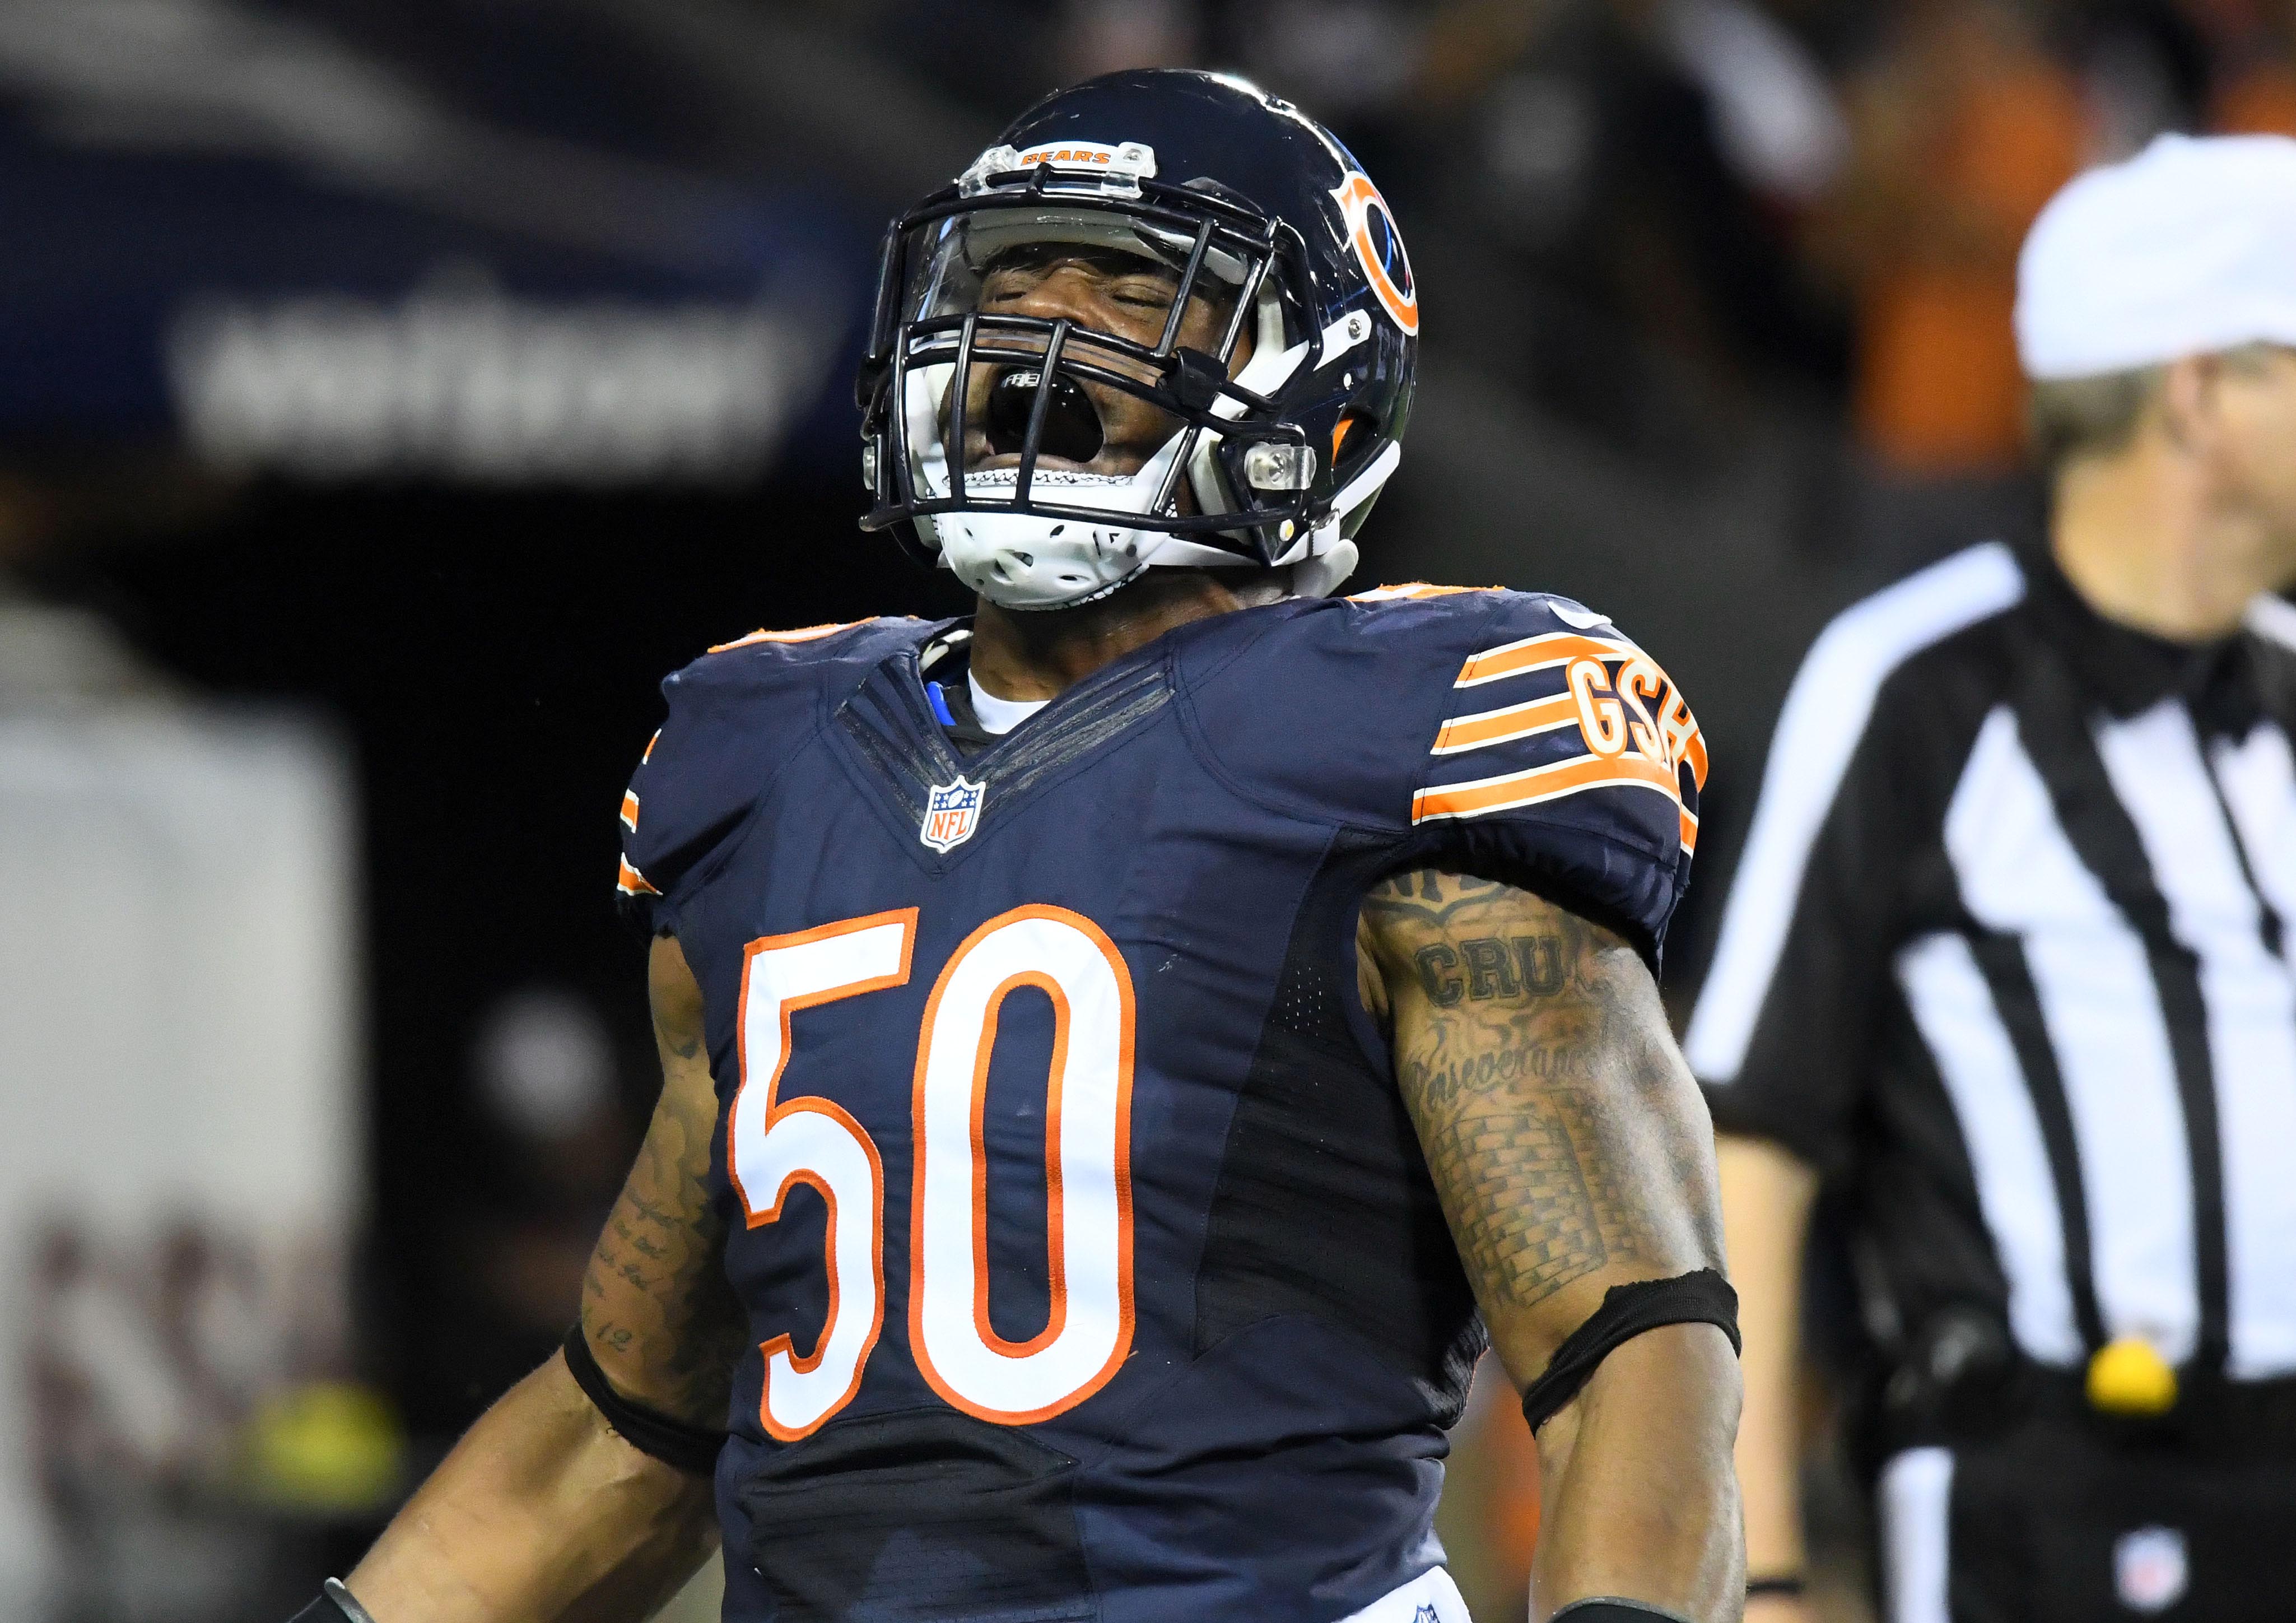 Bears LB Jerrell Freeman suspended 10 games for PED violation